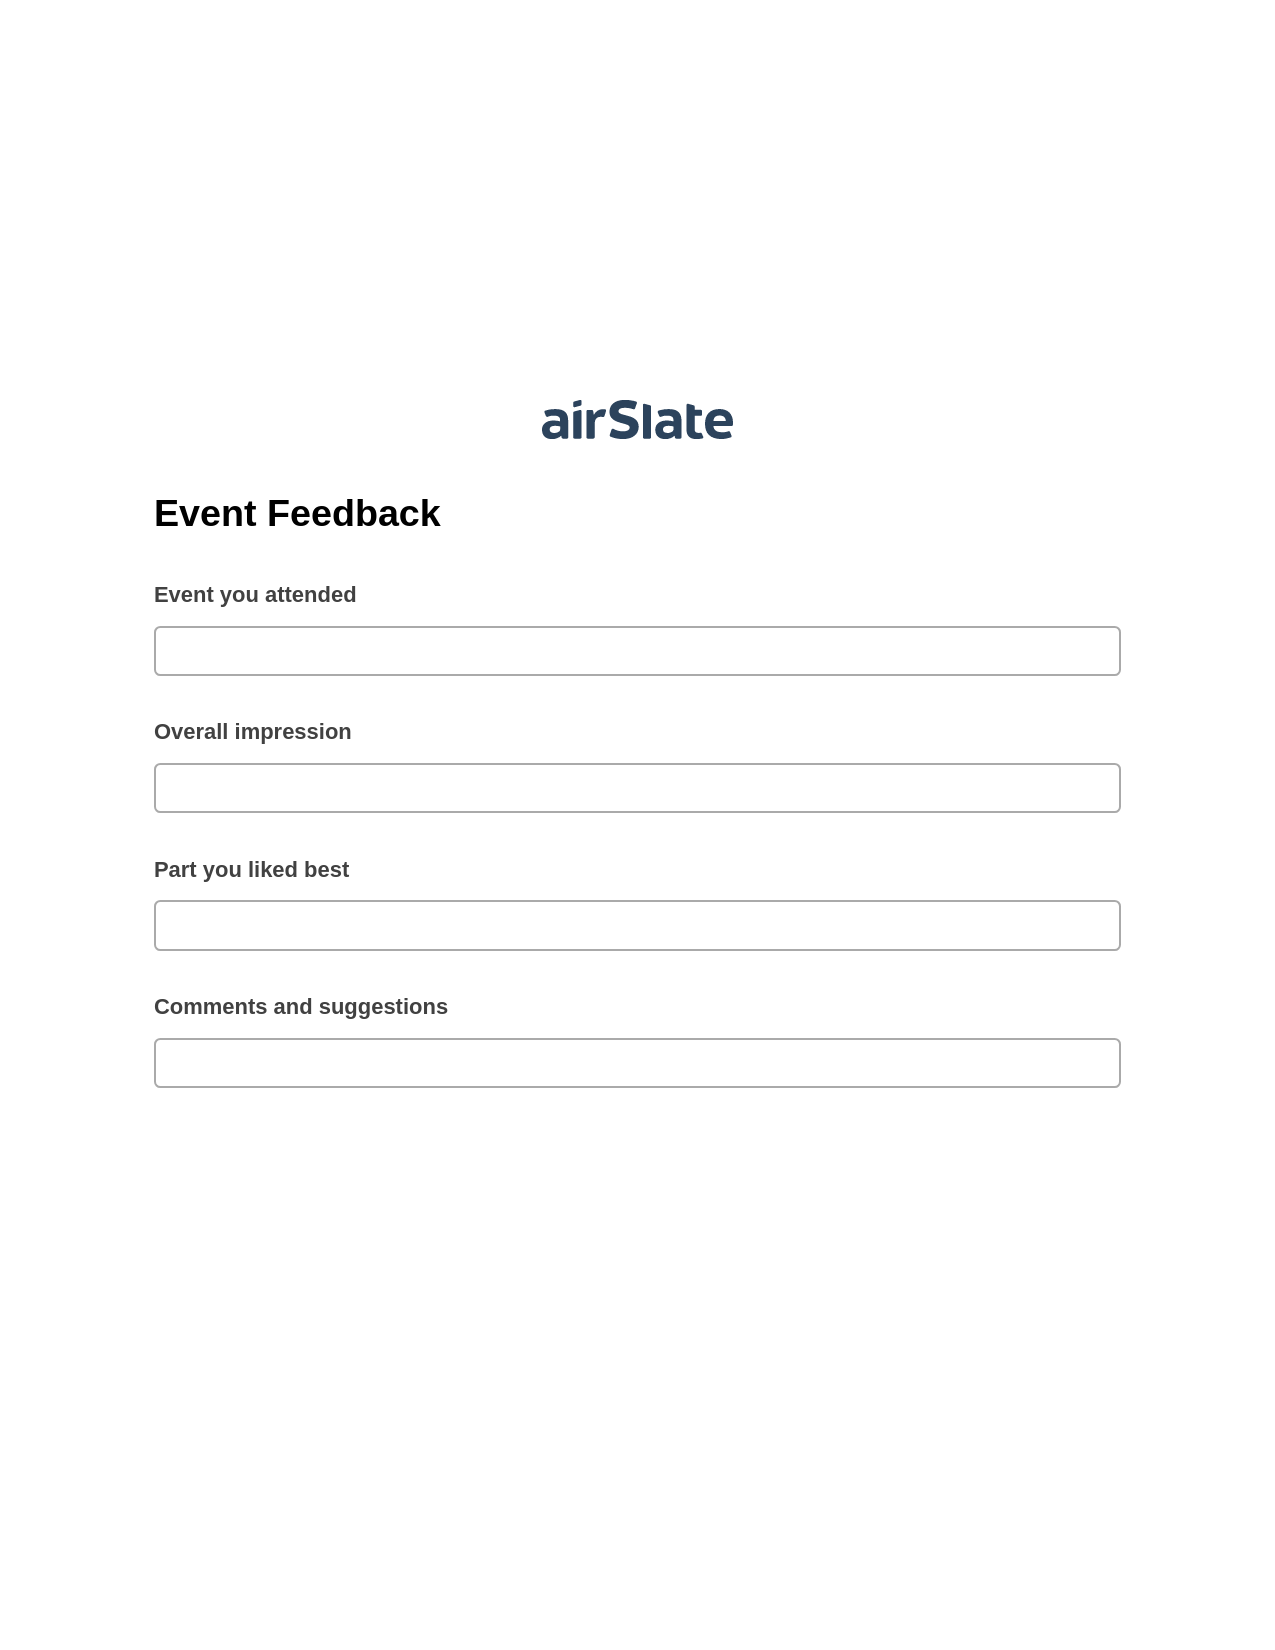 Multirole Event Feedback Pre-fill Slate from MS Dynamics 365 Records Bot, Create slate from another Flow Bot, OneDrive Bot